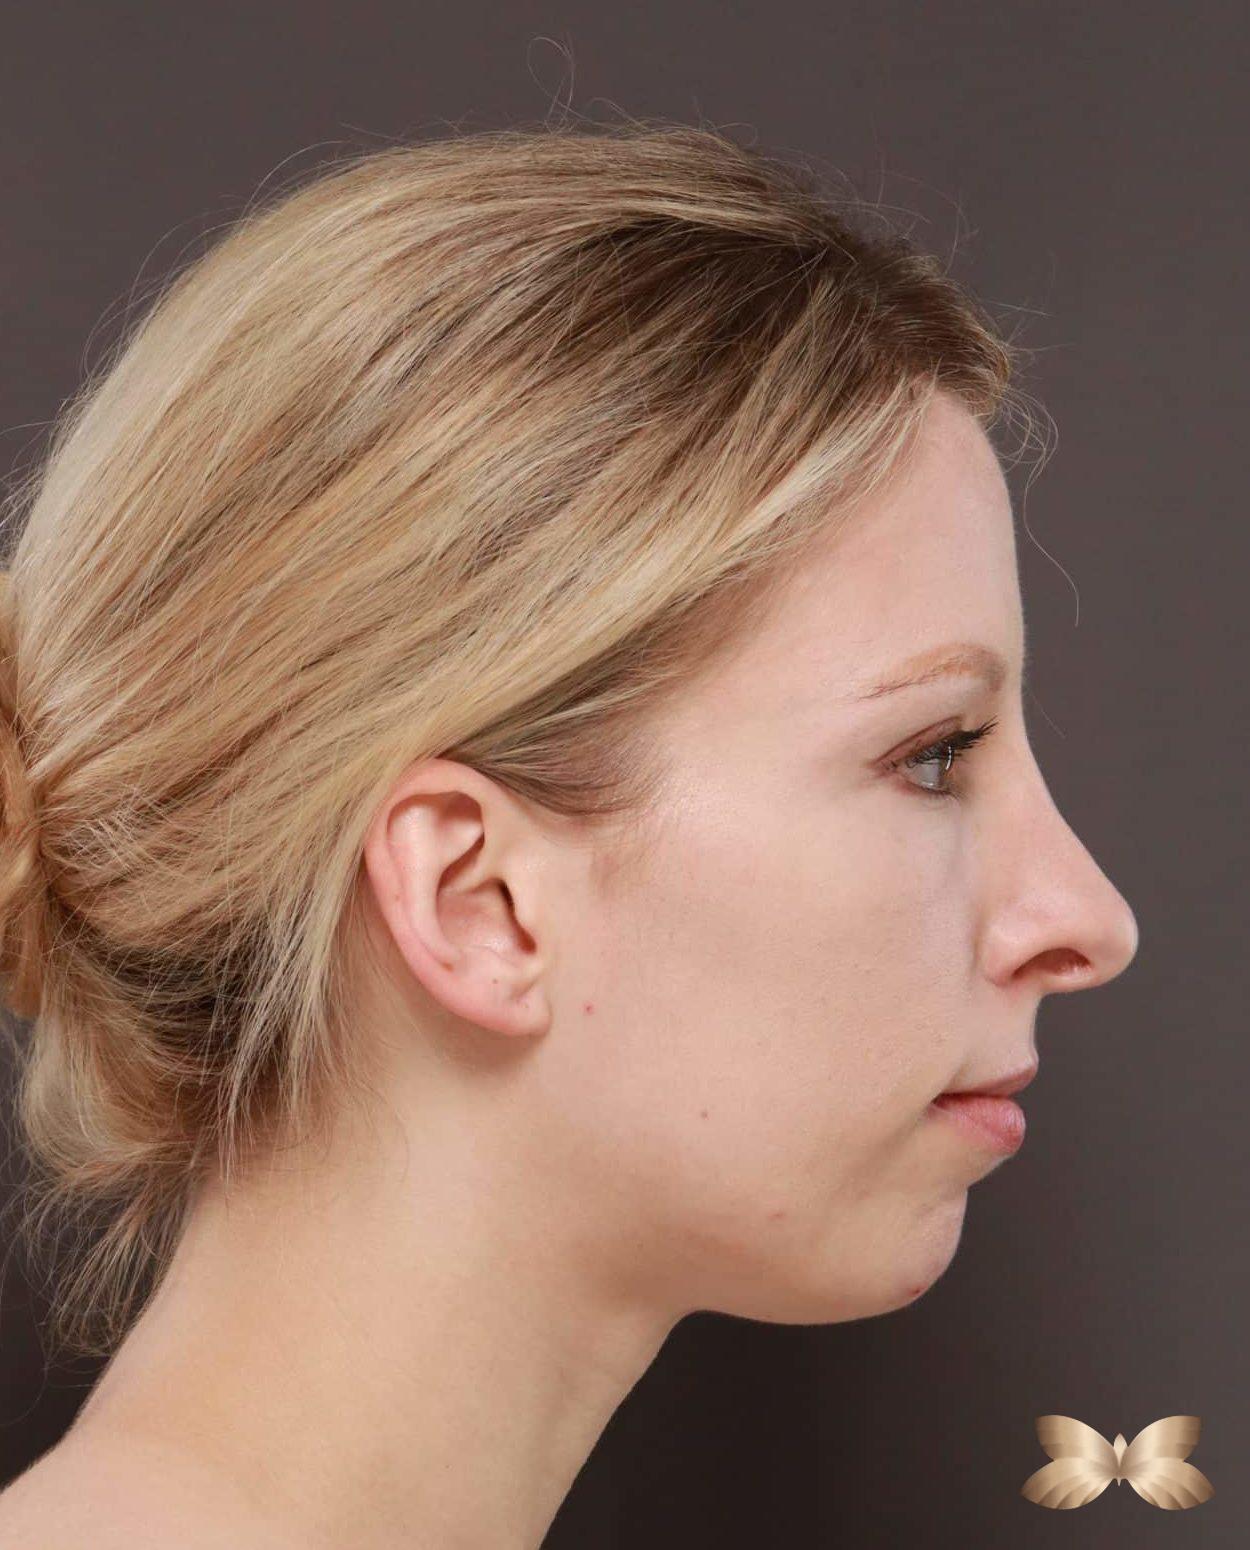 Revision Rhinoplasty and Chin Implant by: Dr. Henstrom